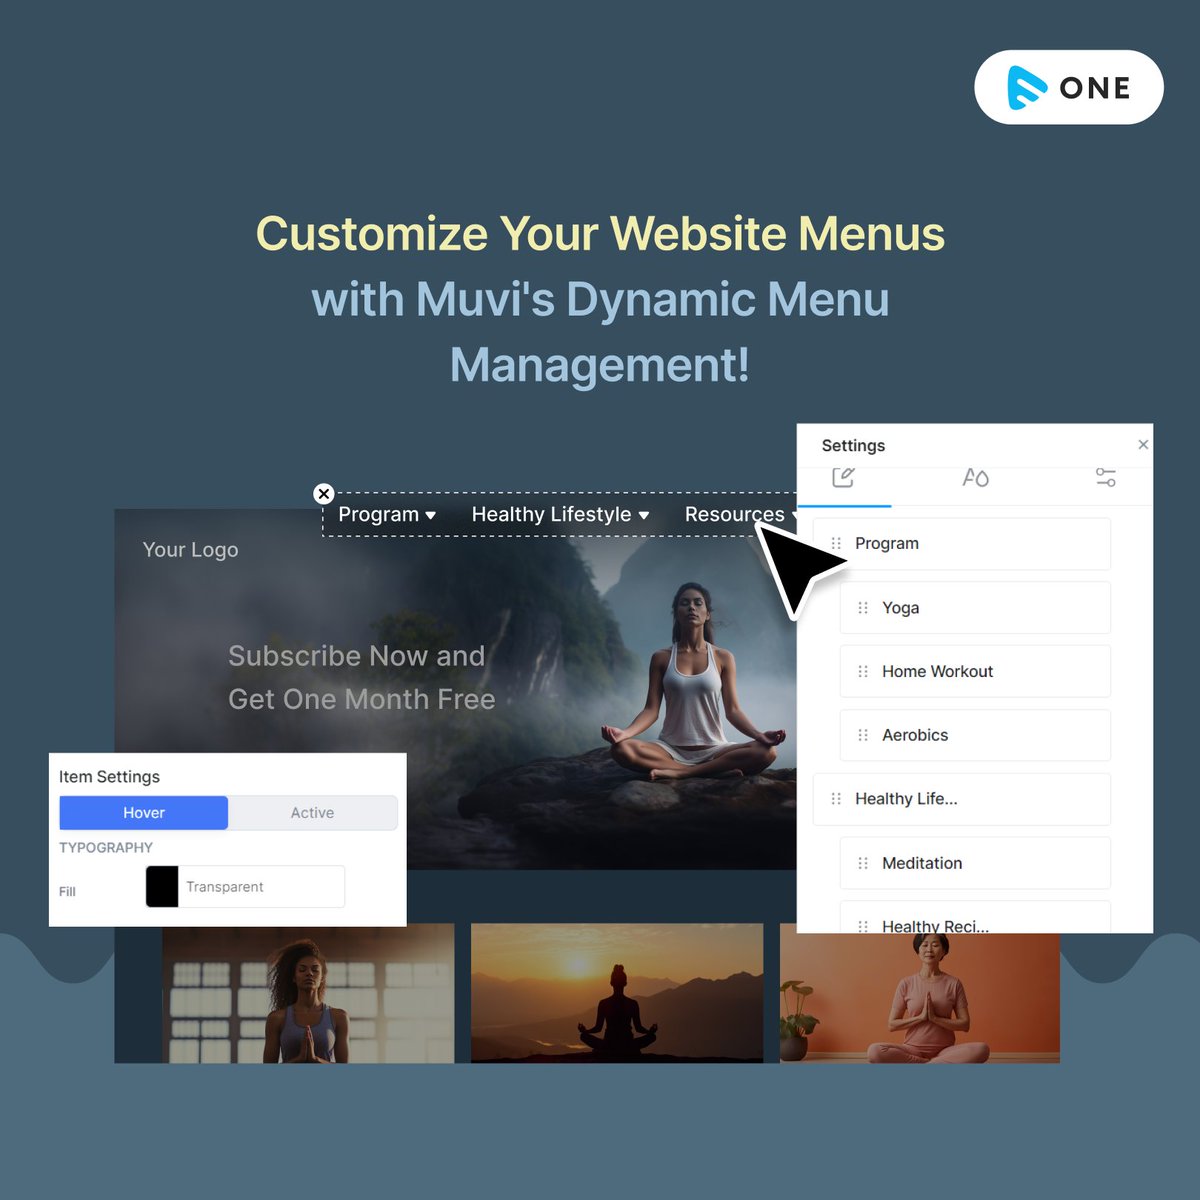 Empower Your Platform with Muvi's Dynamic Menu Management. Create, Edit, and Customize Menus On-the-Fly. Stay in Control, Navigate Easy, and Keep Your Users Engaged! 👉 muvi.com/feature/menu-m… #Muvi #DynamicMenuManagement #WebsiteCustomization #UserEngagement #DynamicMenus